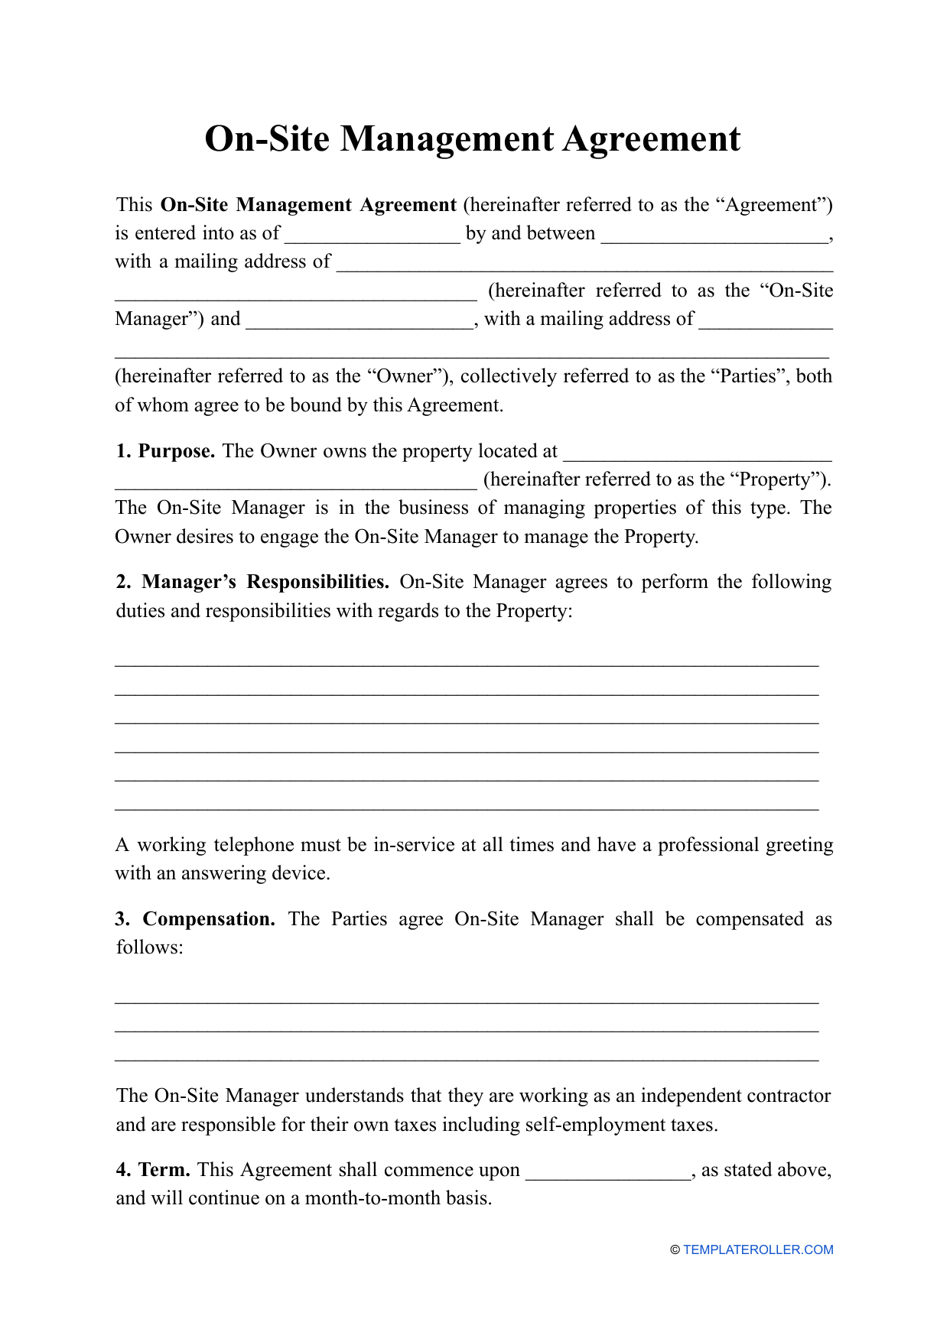 On-Site Management Agreement Template, Page 1